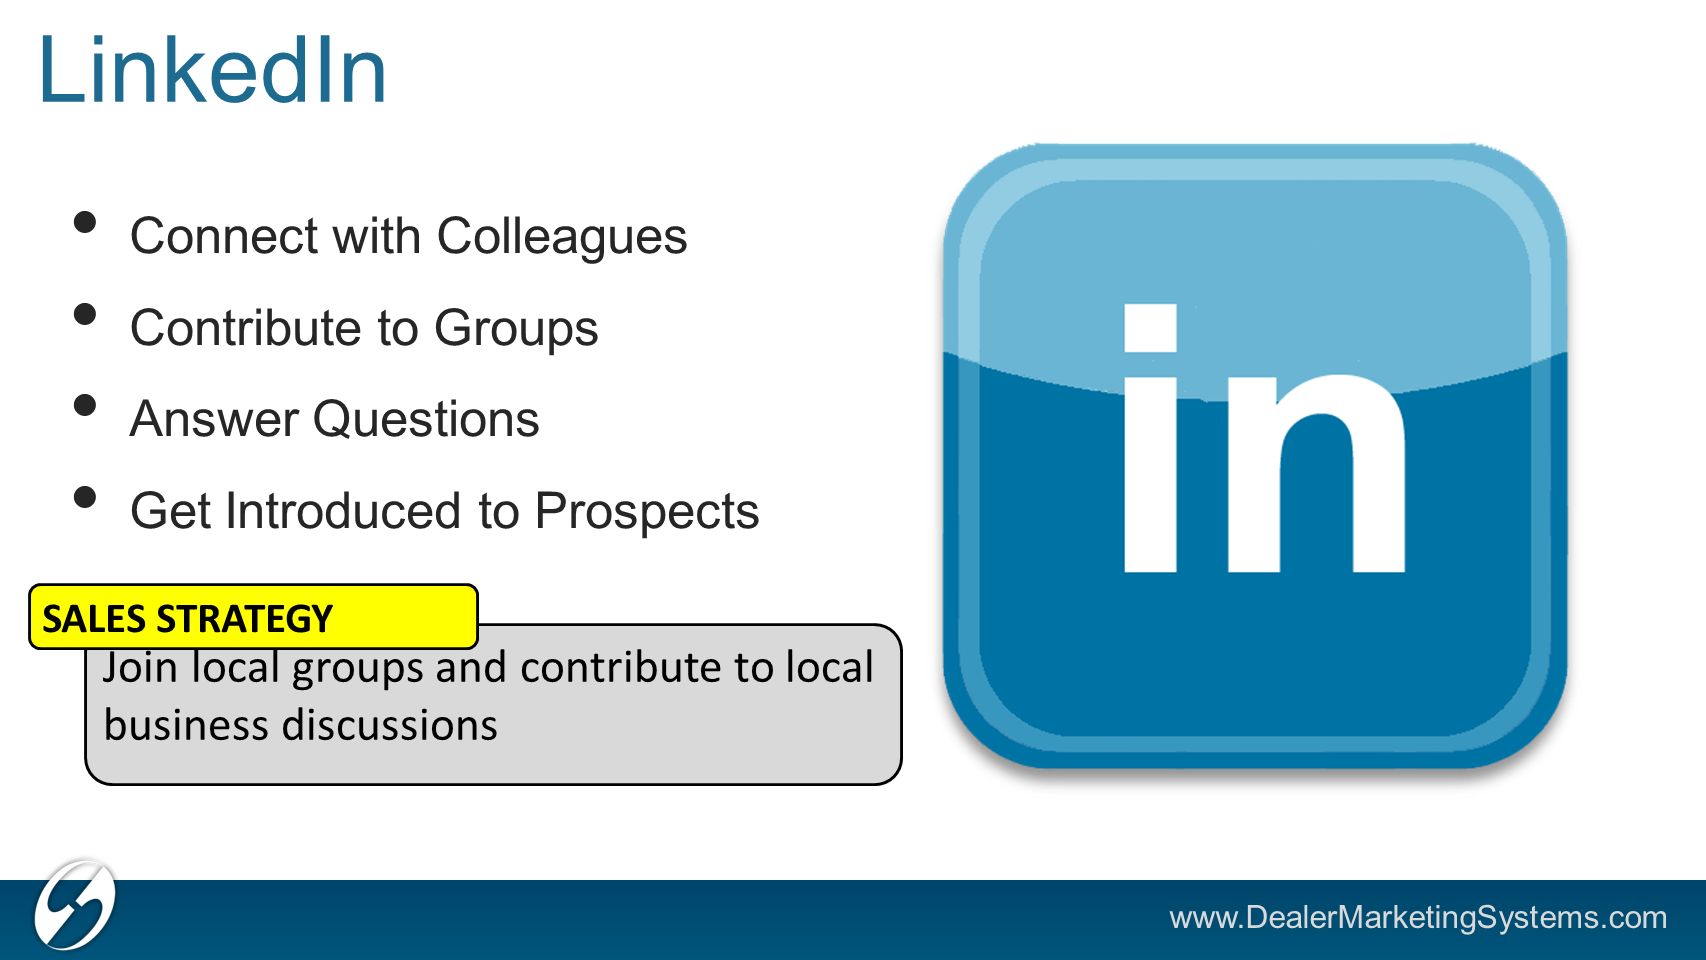 LinkedIn Connect with Colleagues Contribute to Groups Answer Questions Get Introduced to Prospects Join local groups and contribute to local business discussions SALES STRATEGY